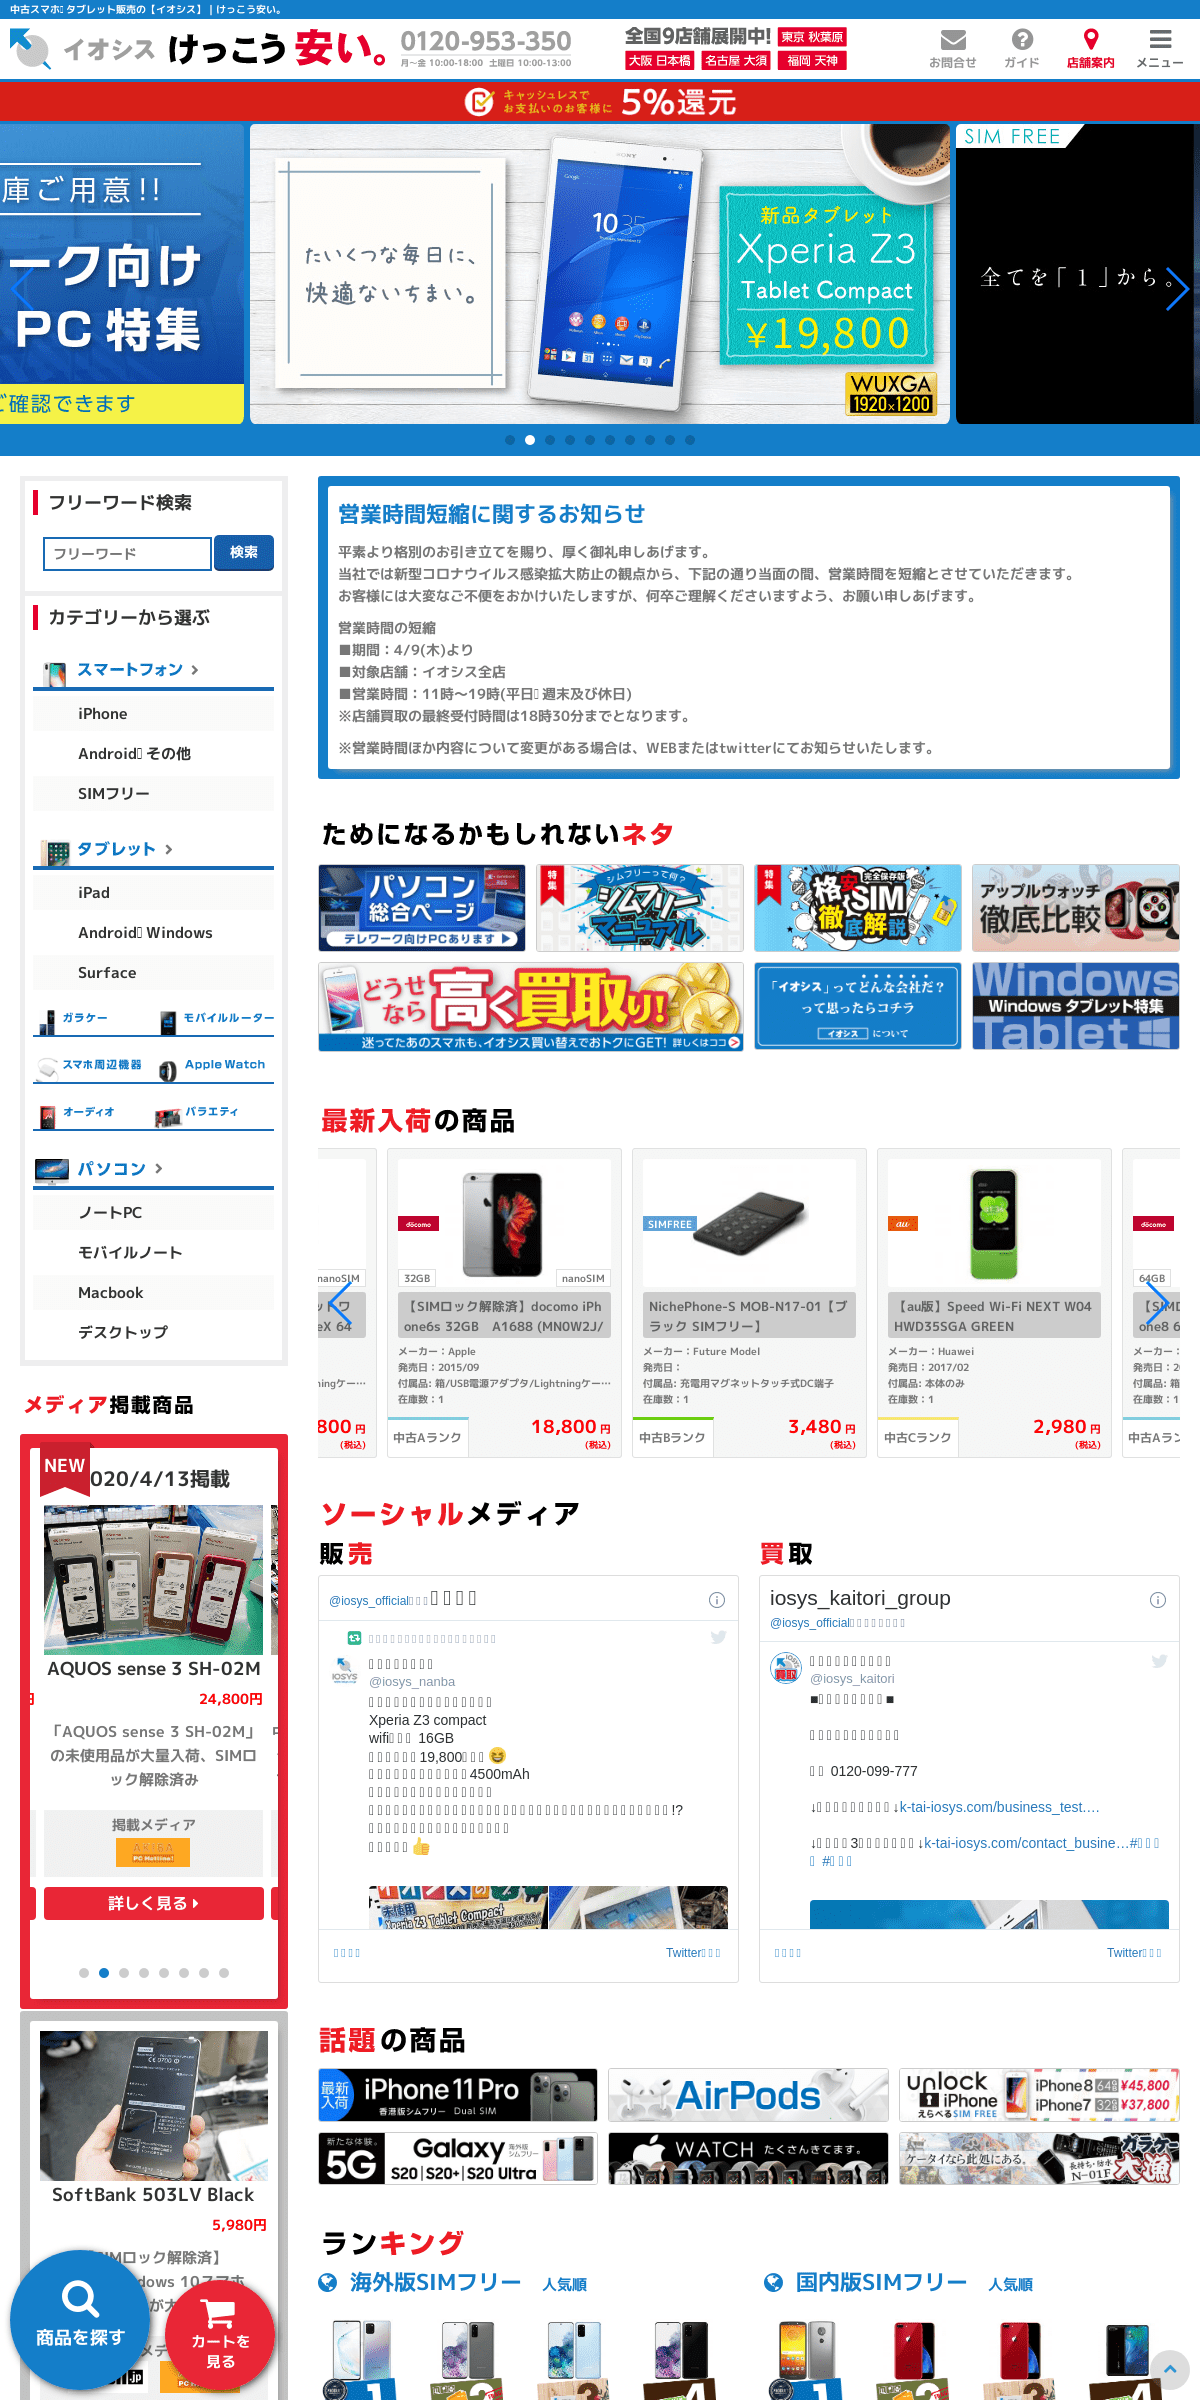 A complete backup of iosys.co.jp